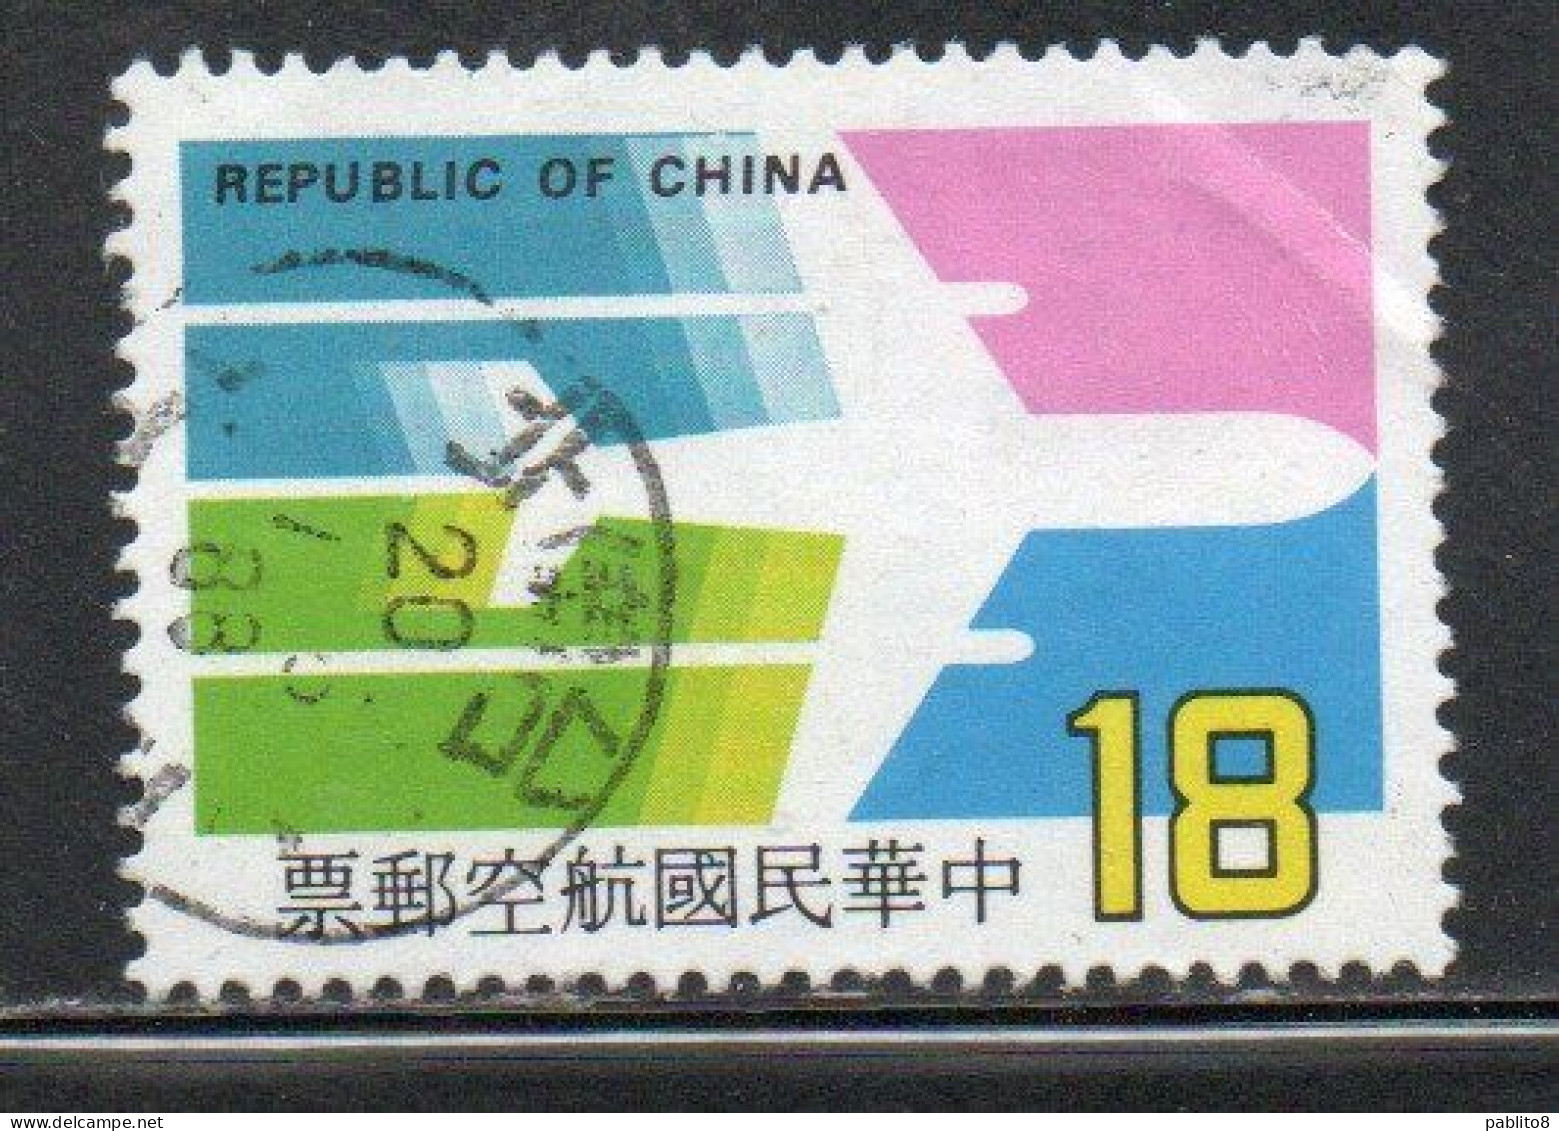 CHINA REPUBLIC CINA TAIWAN FORMOSA 1987 AIR POST MAIL AIRMAIL AIRPLANE 18$ USED USATO OBLITERE' - Airmail